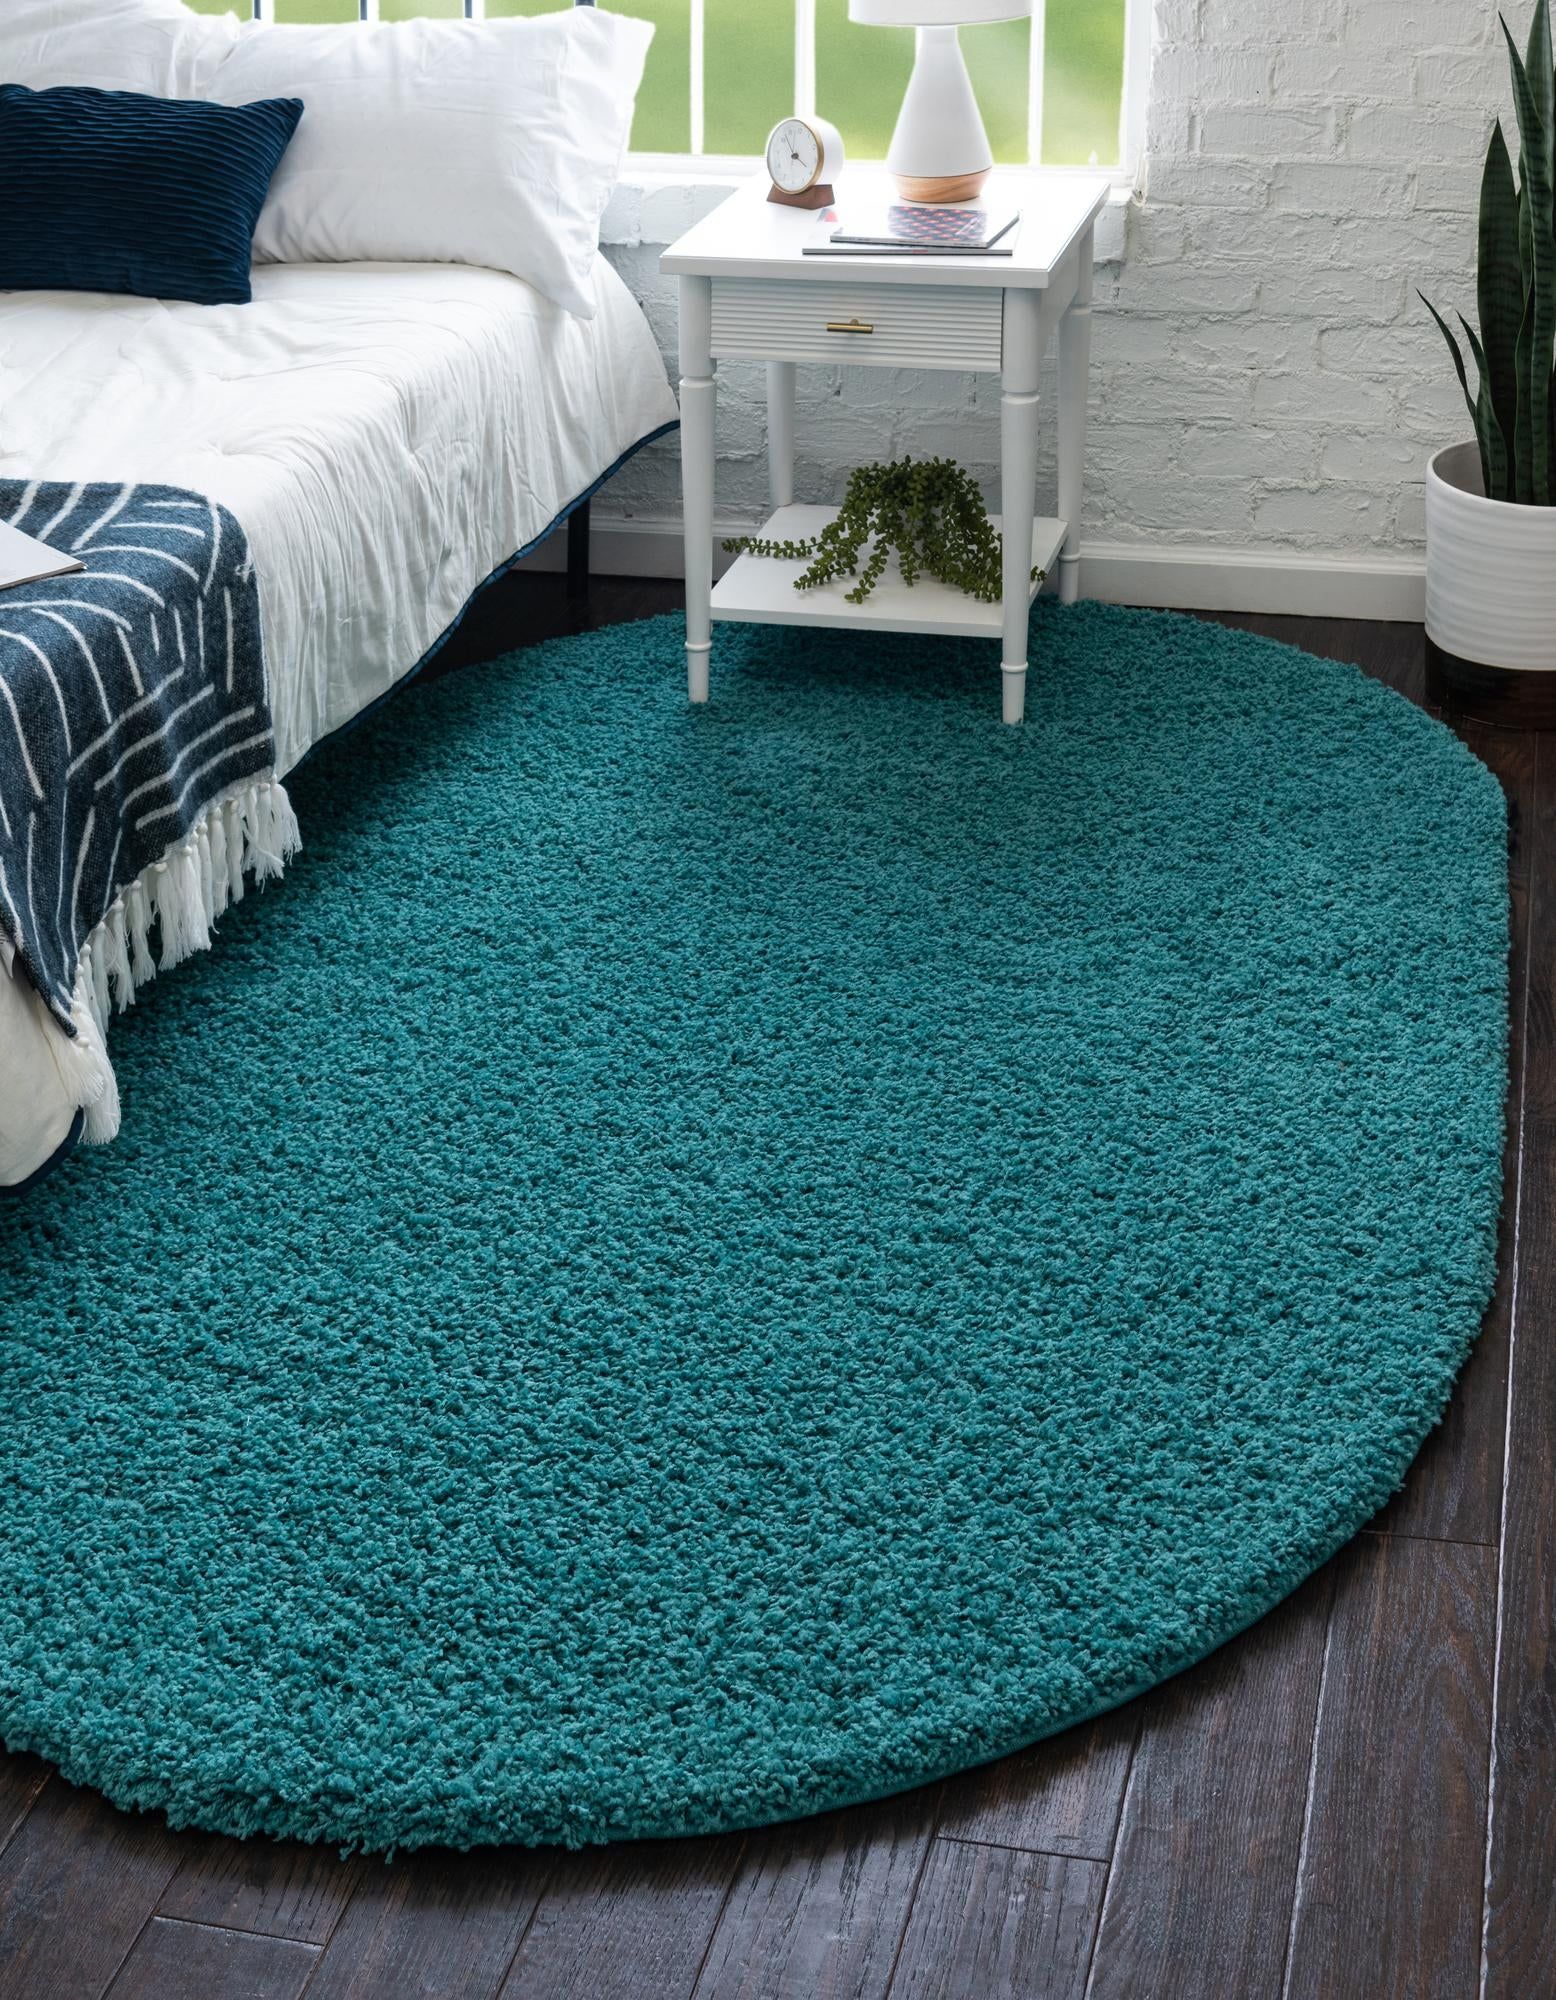 Rugs Solid Shag Collection Rug – 5' X 8' Oval Deep Aqua Blue Shag Rug  Perfect For Living Rooms, Large Dining Rooms, Open Floorplans – Walmart Throughout Shag Oval Rugs (Photo 9 of 15)